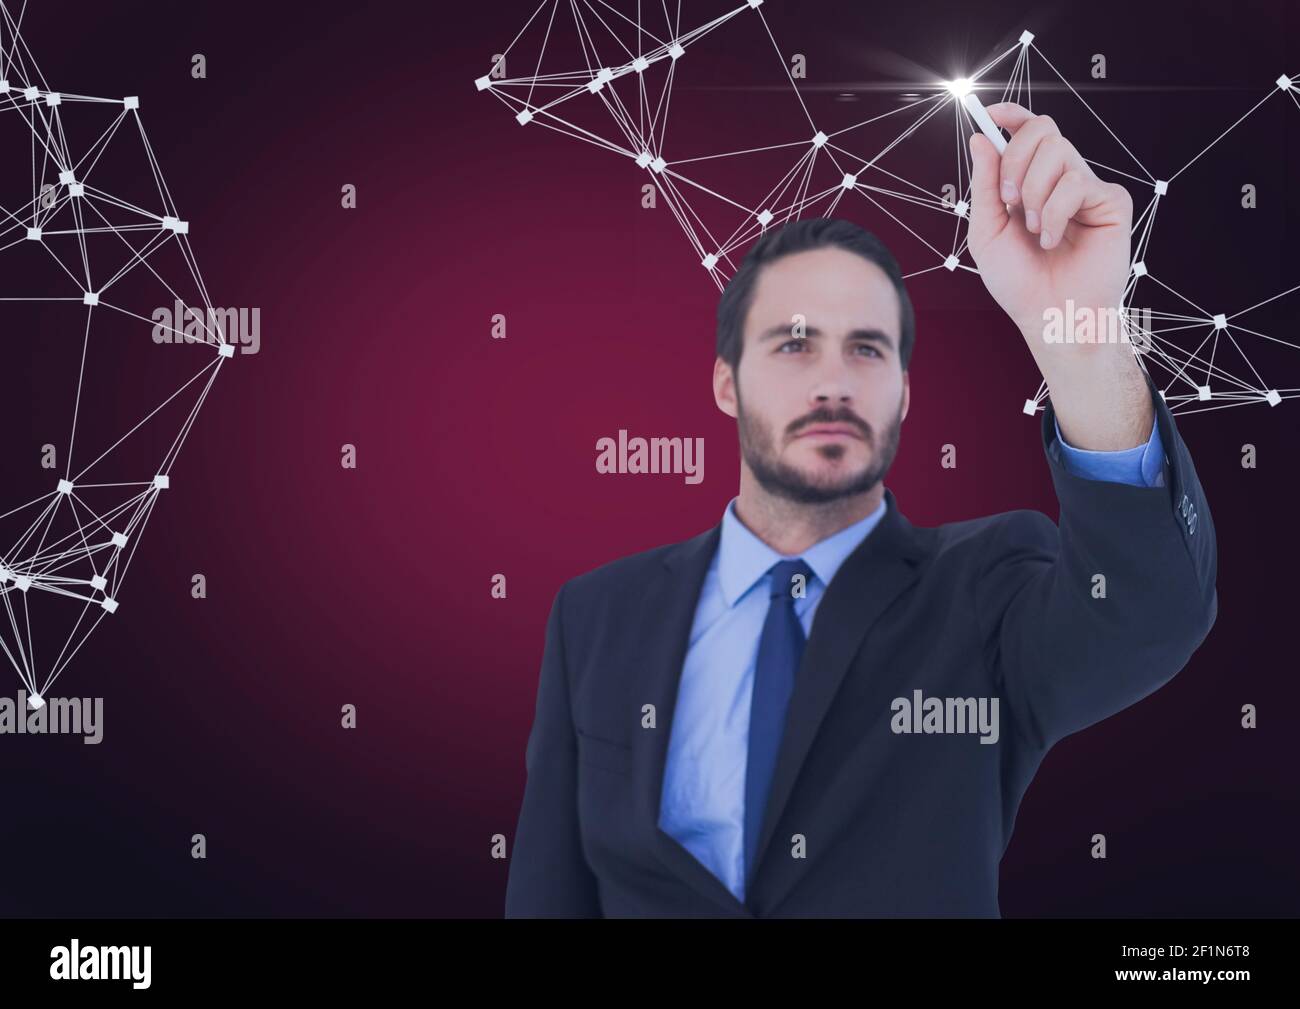 Network of connections against businessman writing on invisible screen against red background Stock Photo